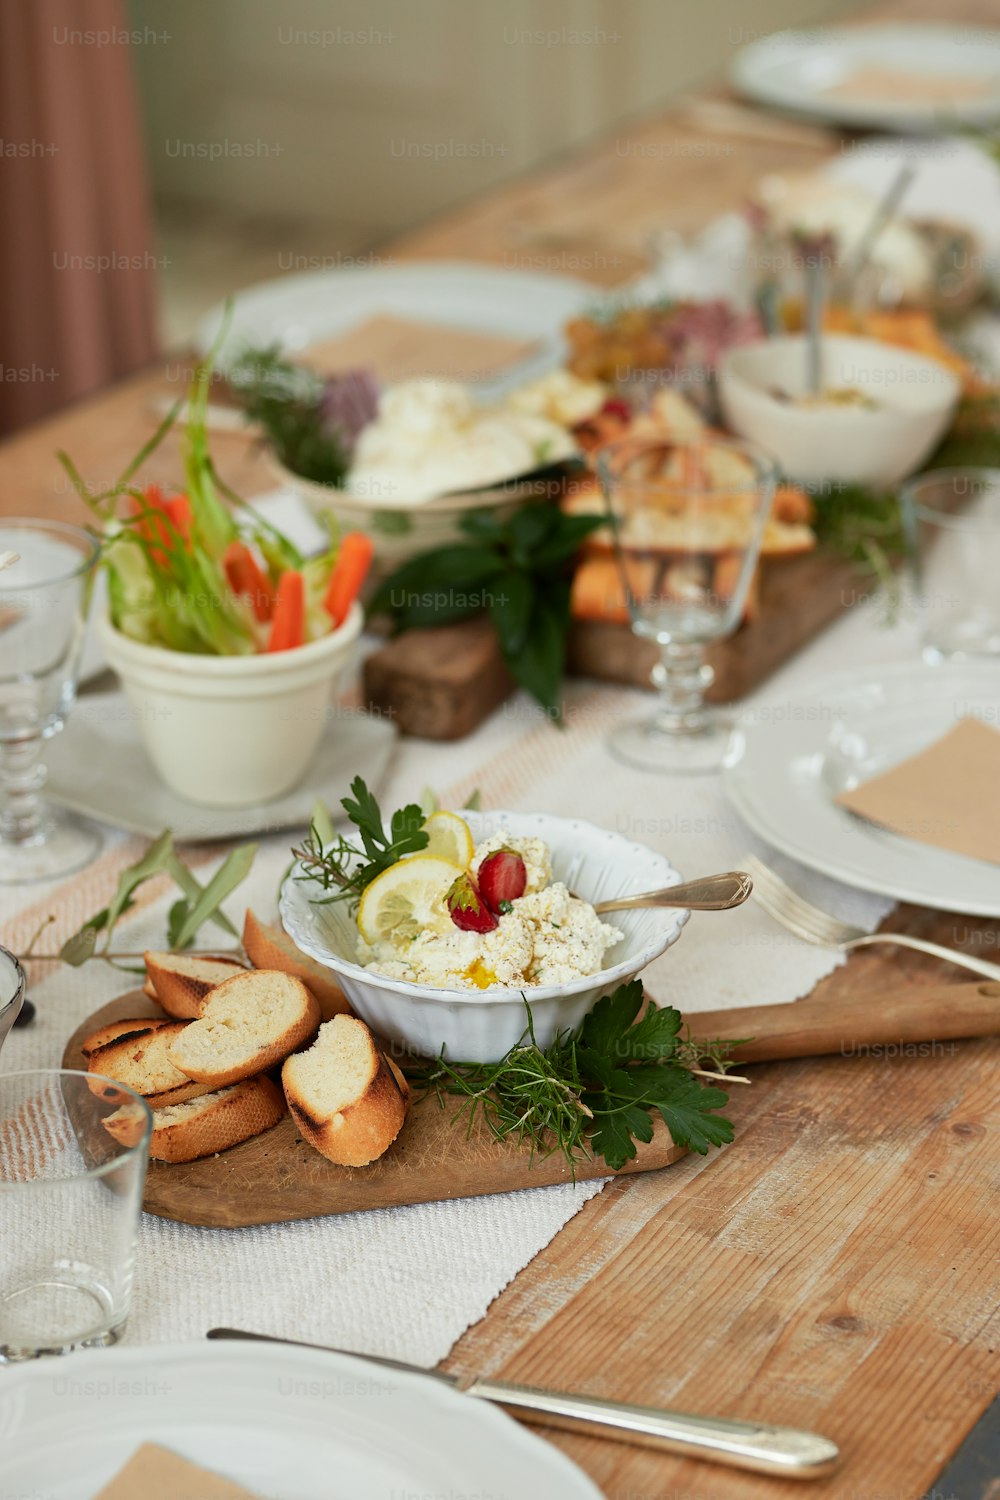 a wooden table topped with plates and bowls of food